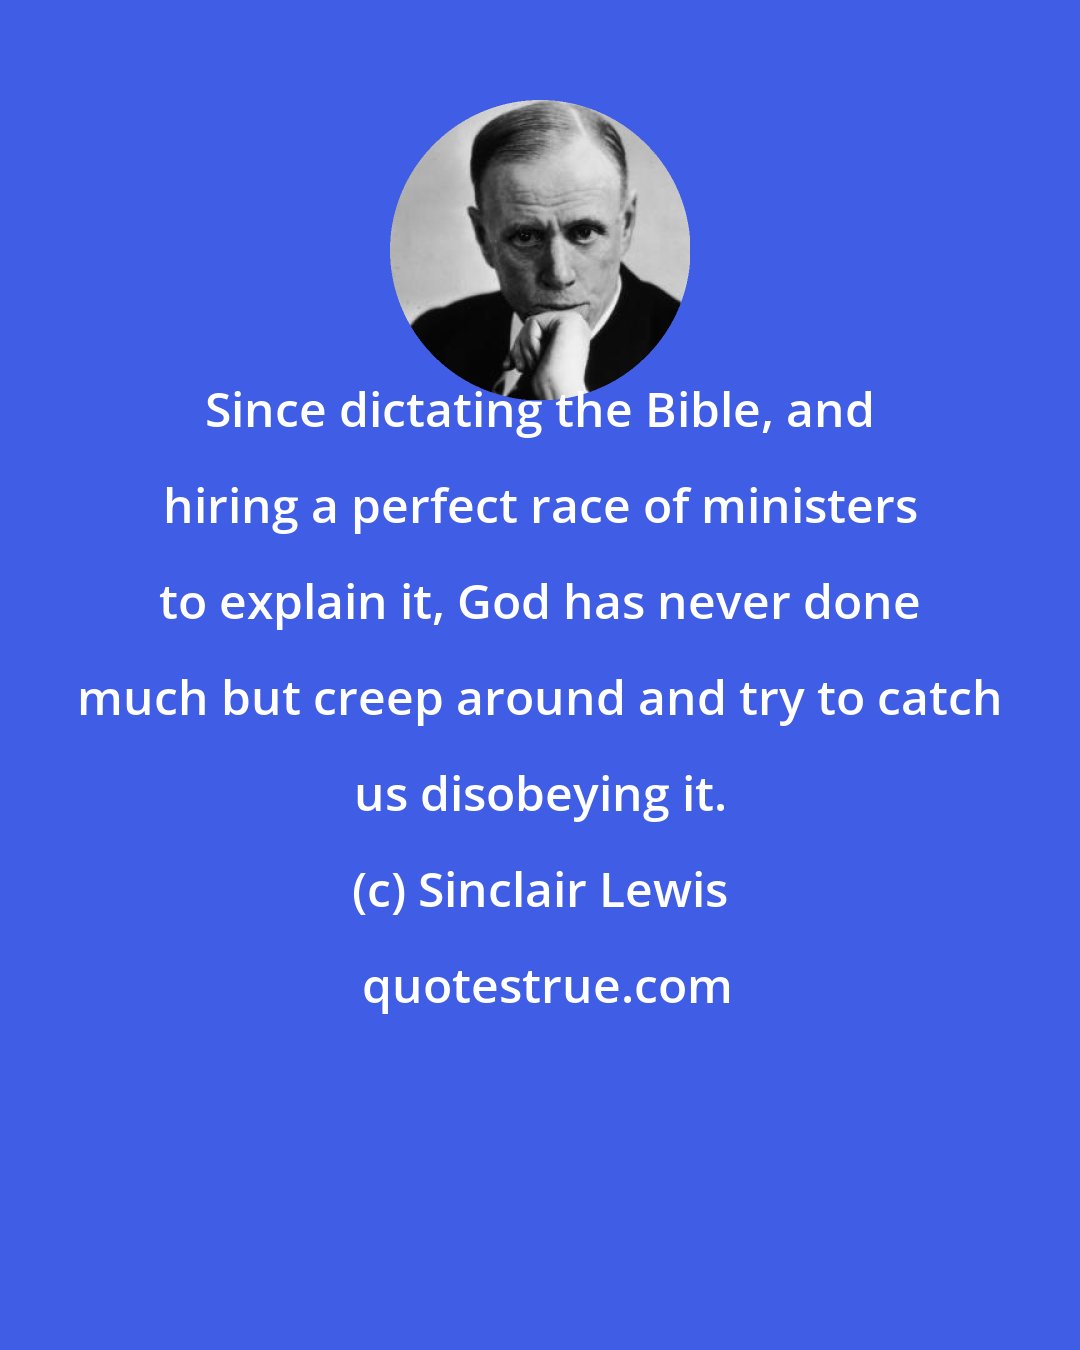 Sinclair Lewis: Since dictating the Bible, and hiring a perfect race of ministers to explain it, God has never done much but creep around and try to catch us disobeying it.